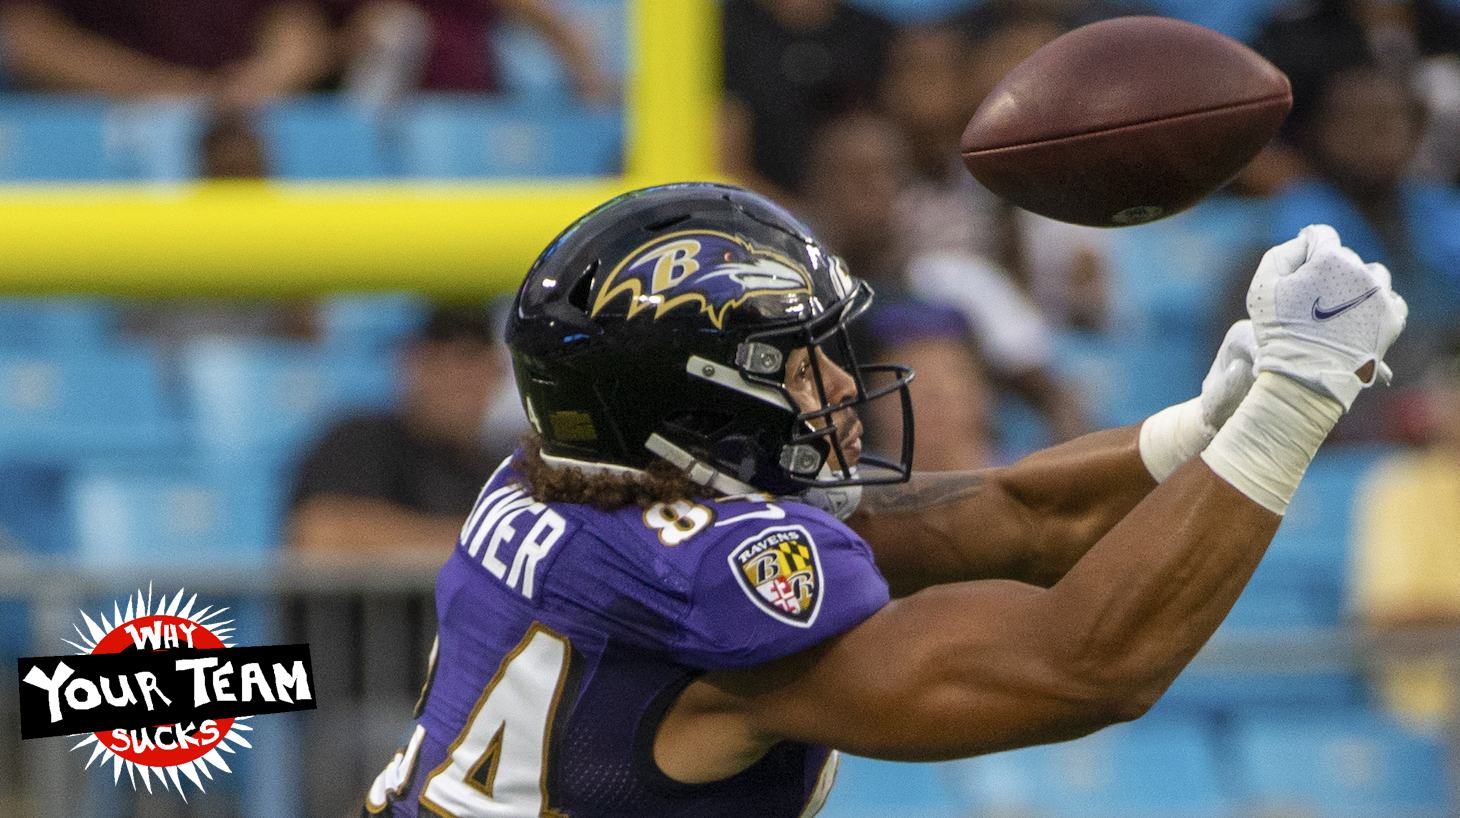 CHARLOTTE, NC - AUGUST 21: Josh Oliver #84 of the Baltimore Ravens attempts to make a catch against the Carolina Panthers during the first half of a NFL preseason game at Bank of America Stadium on August 21, 2021 in Charlotte, North Carolina. (Photo by Chris Keane/Getty Images)